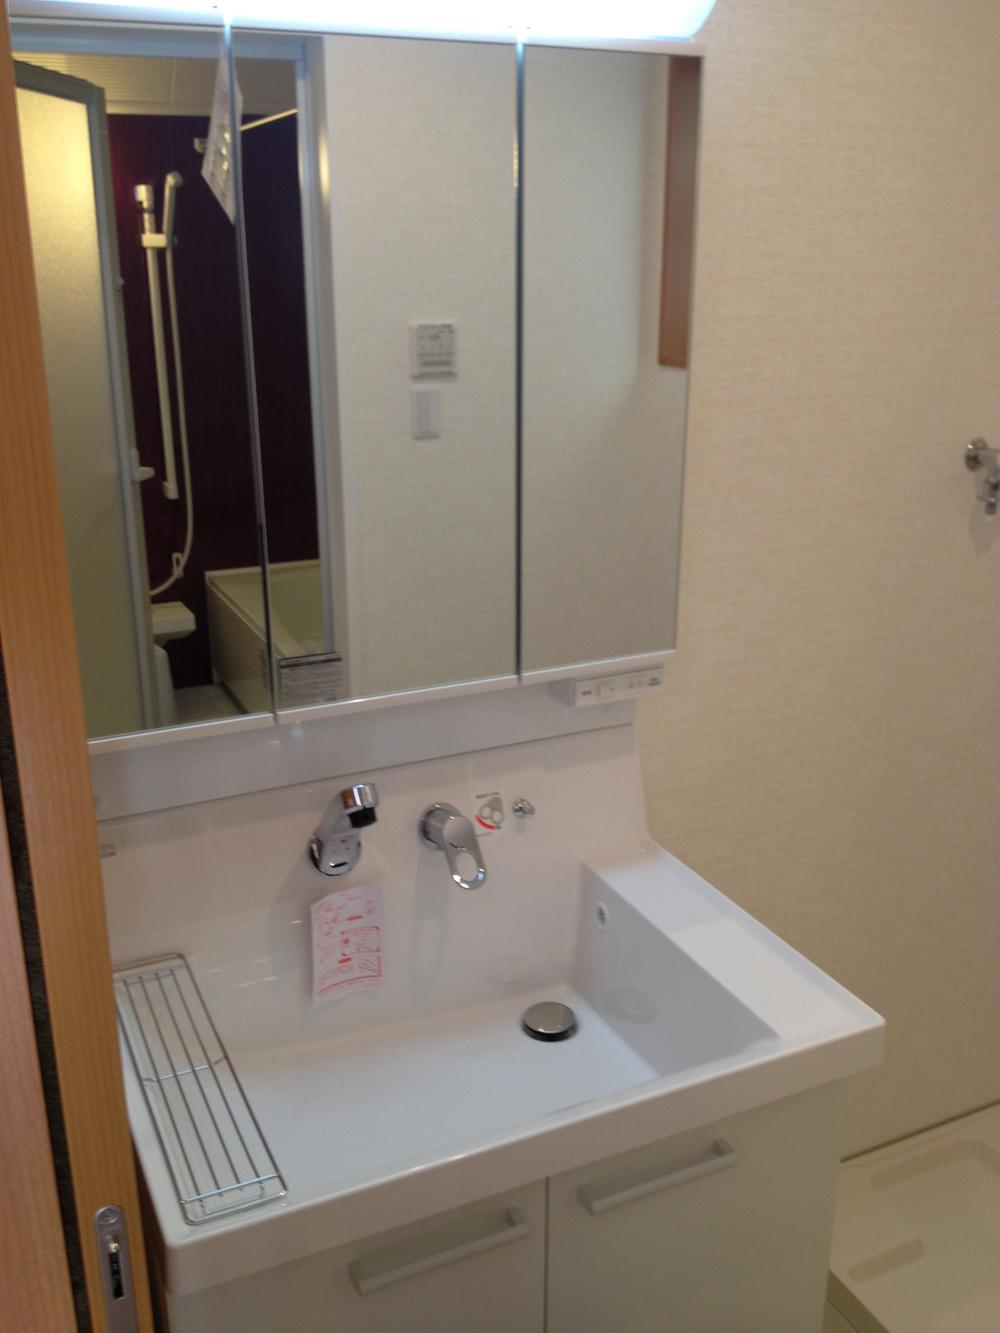 Wash basin, toilet. Comfortable life plenty of storage in the provided was a washbasin with shower (triple mirror)